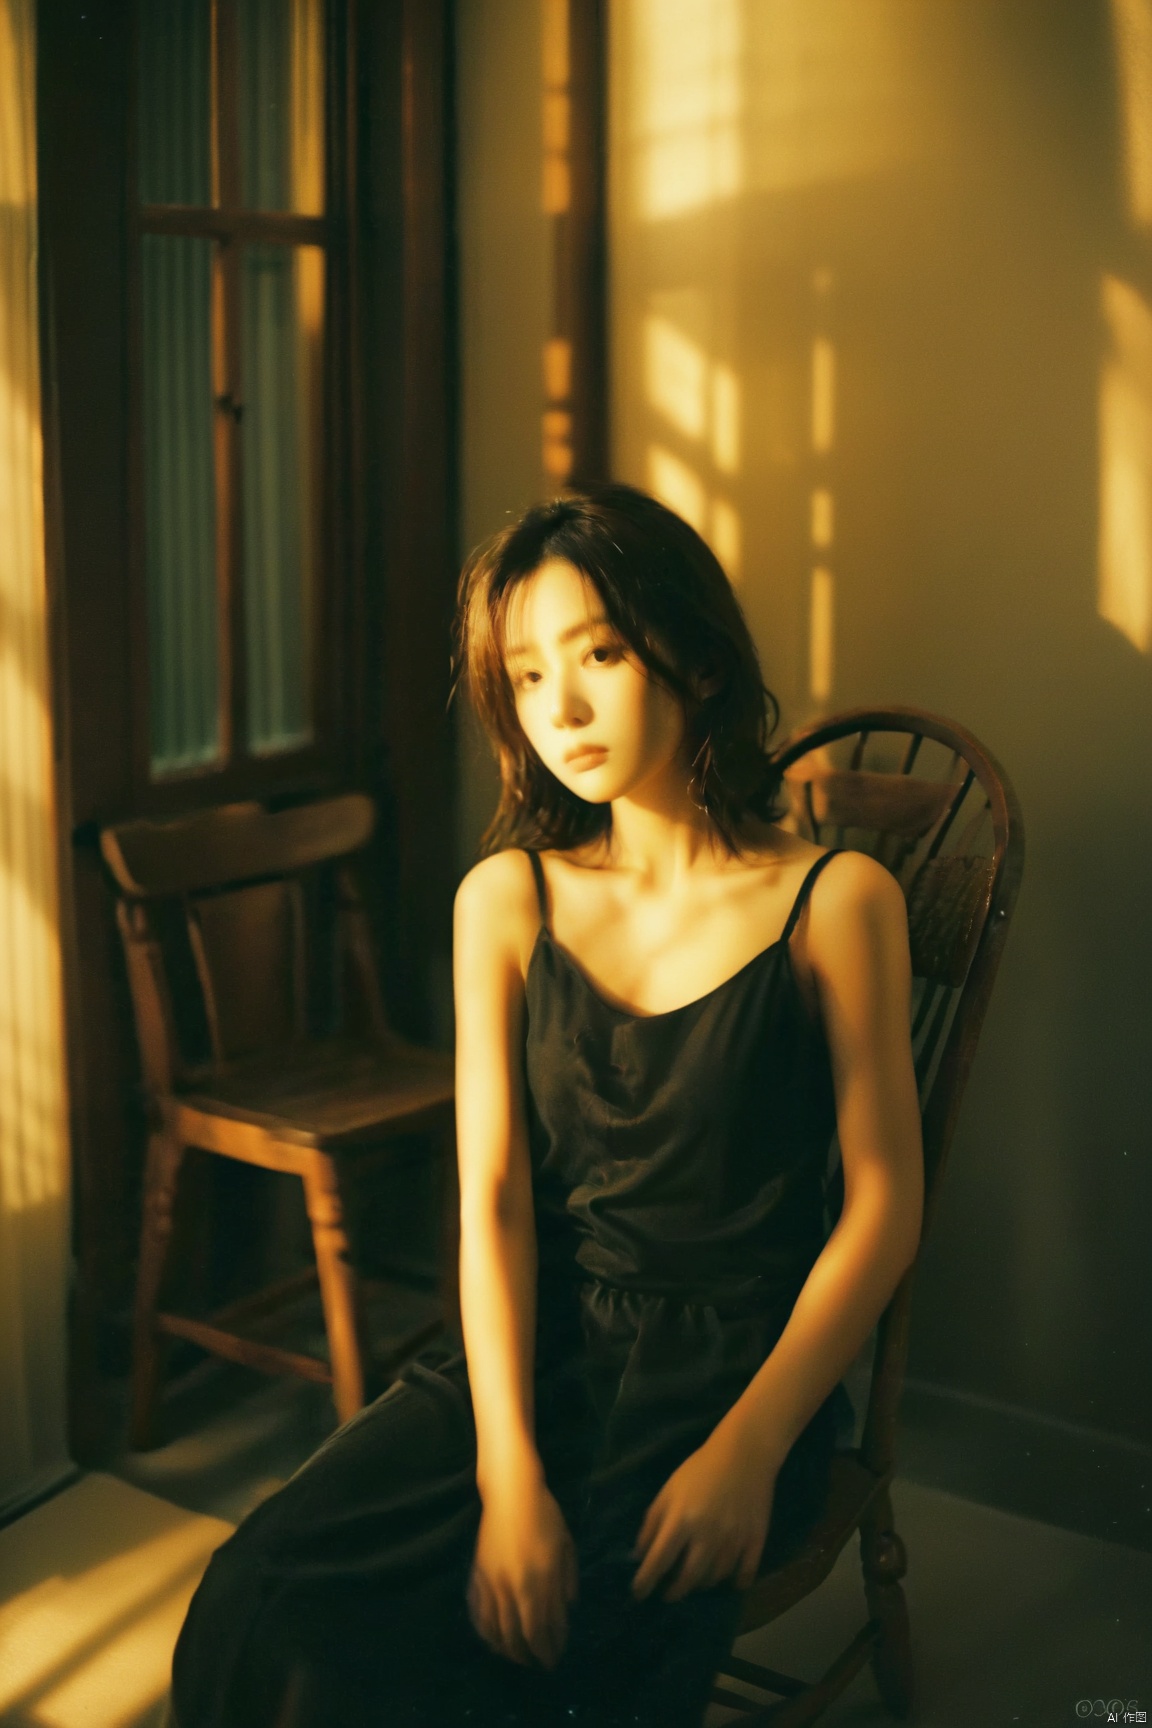  best quality,film grain,1girl, candlelight, moody lighting, dark atmosphere, black **** top, seated, wooden chair, contemplative expression, indoors, night, shadows, window blinds, soft focus, warm color tones, vintage look, young *****, serene, elegant, mysterious, angle fisheye, Professional, film grain